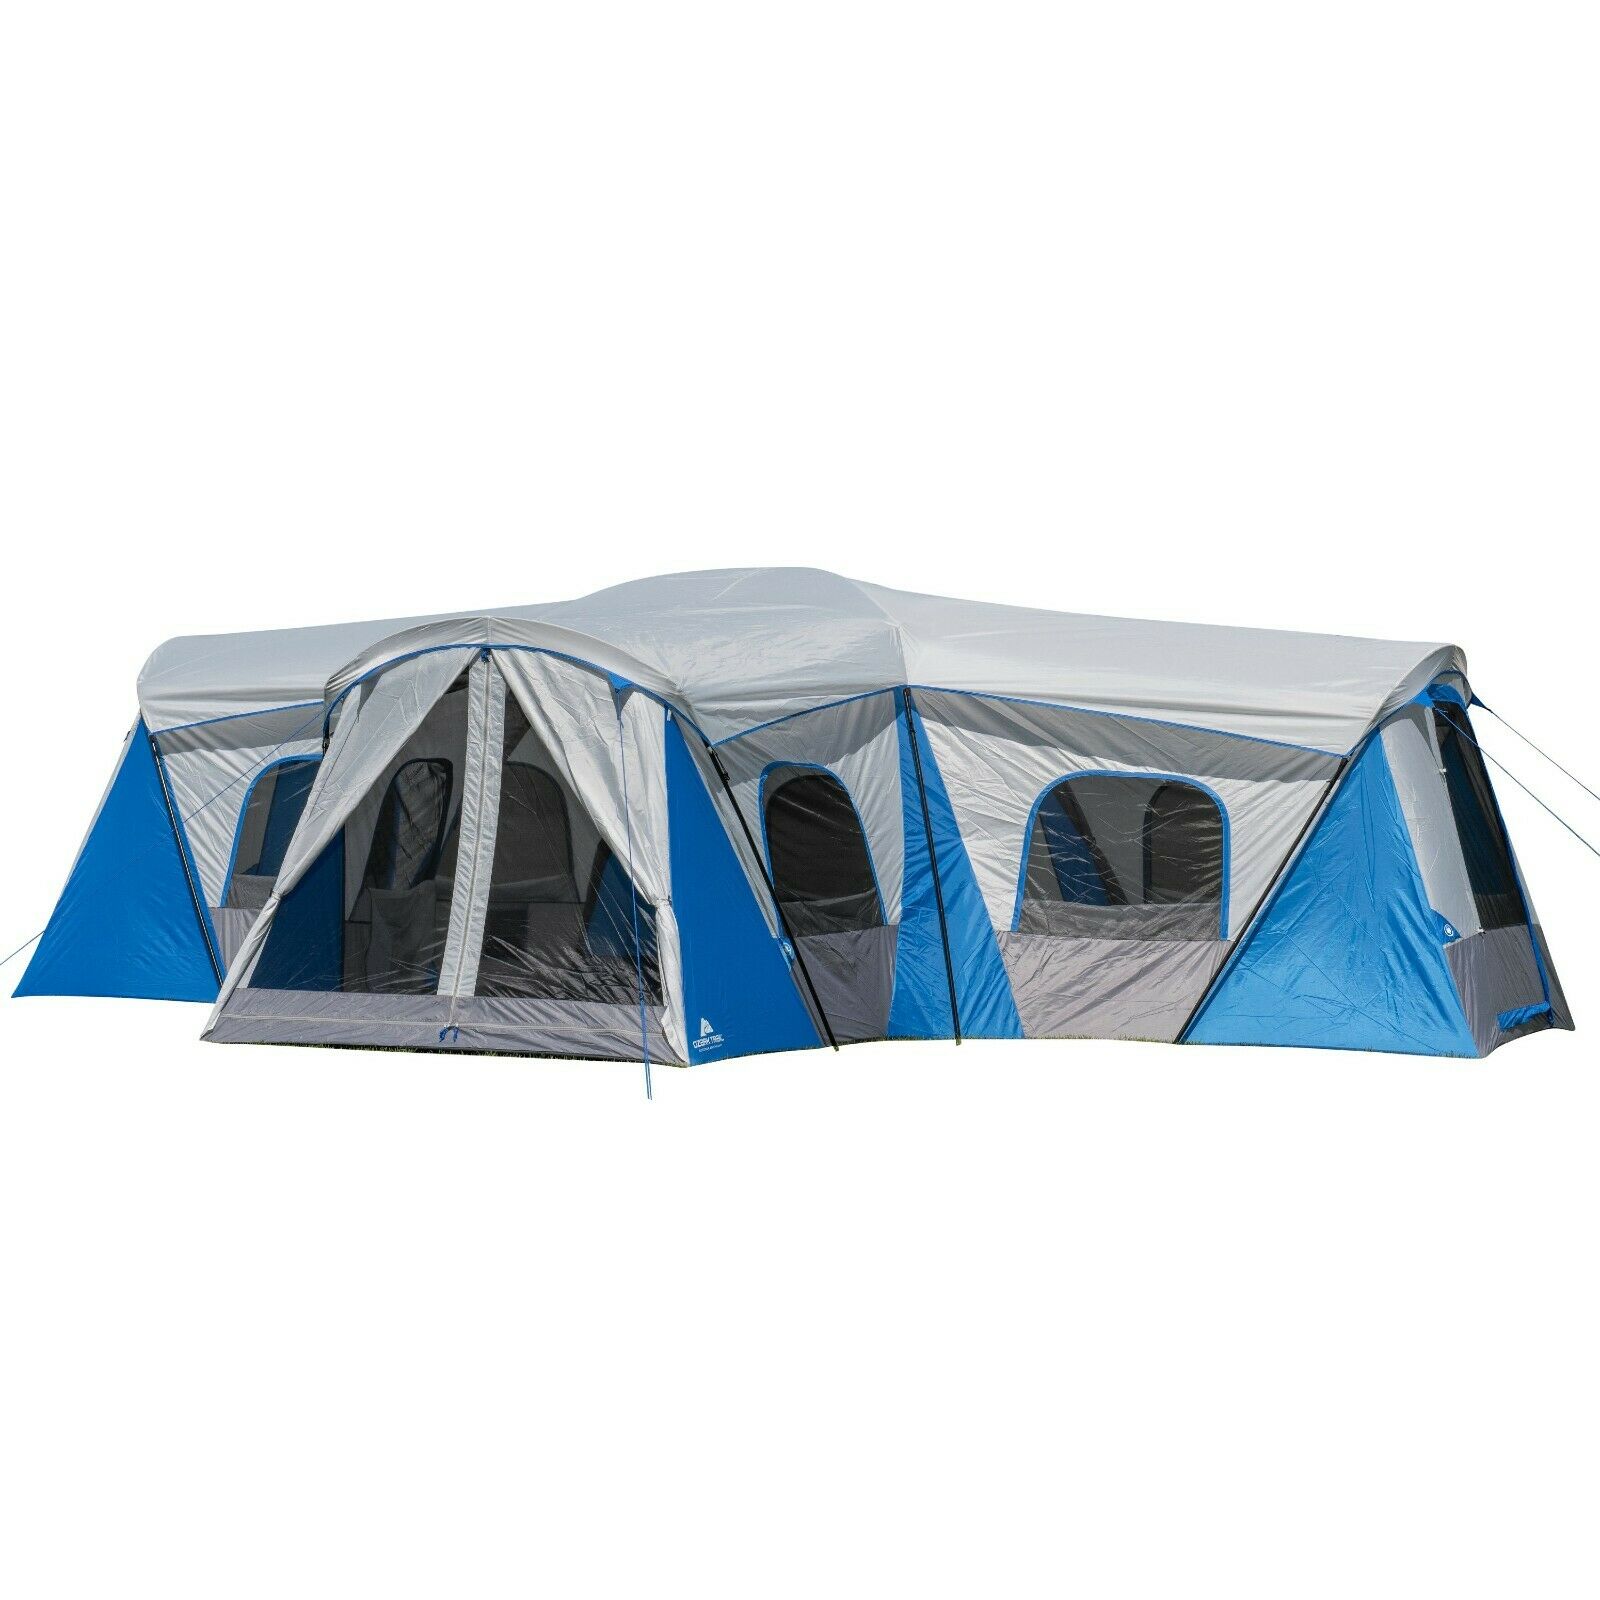 16-Person 3-Room Family Cabin Tent with 3 Entrances Outdoor Camping Sleeping